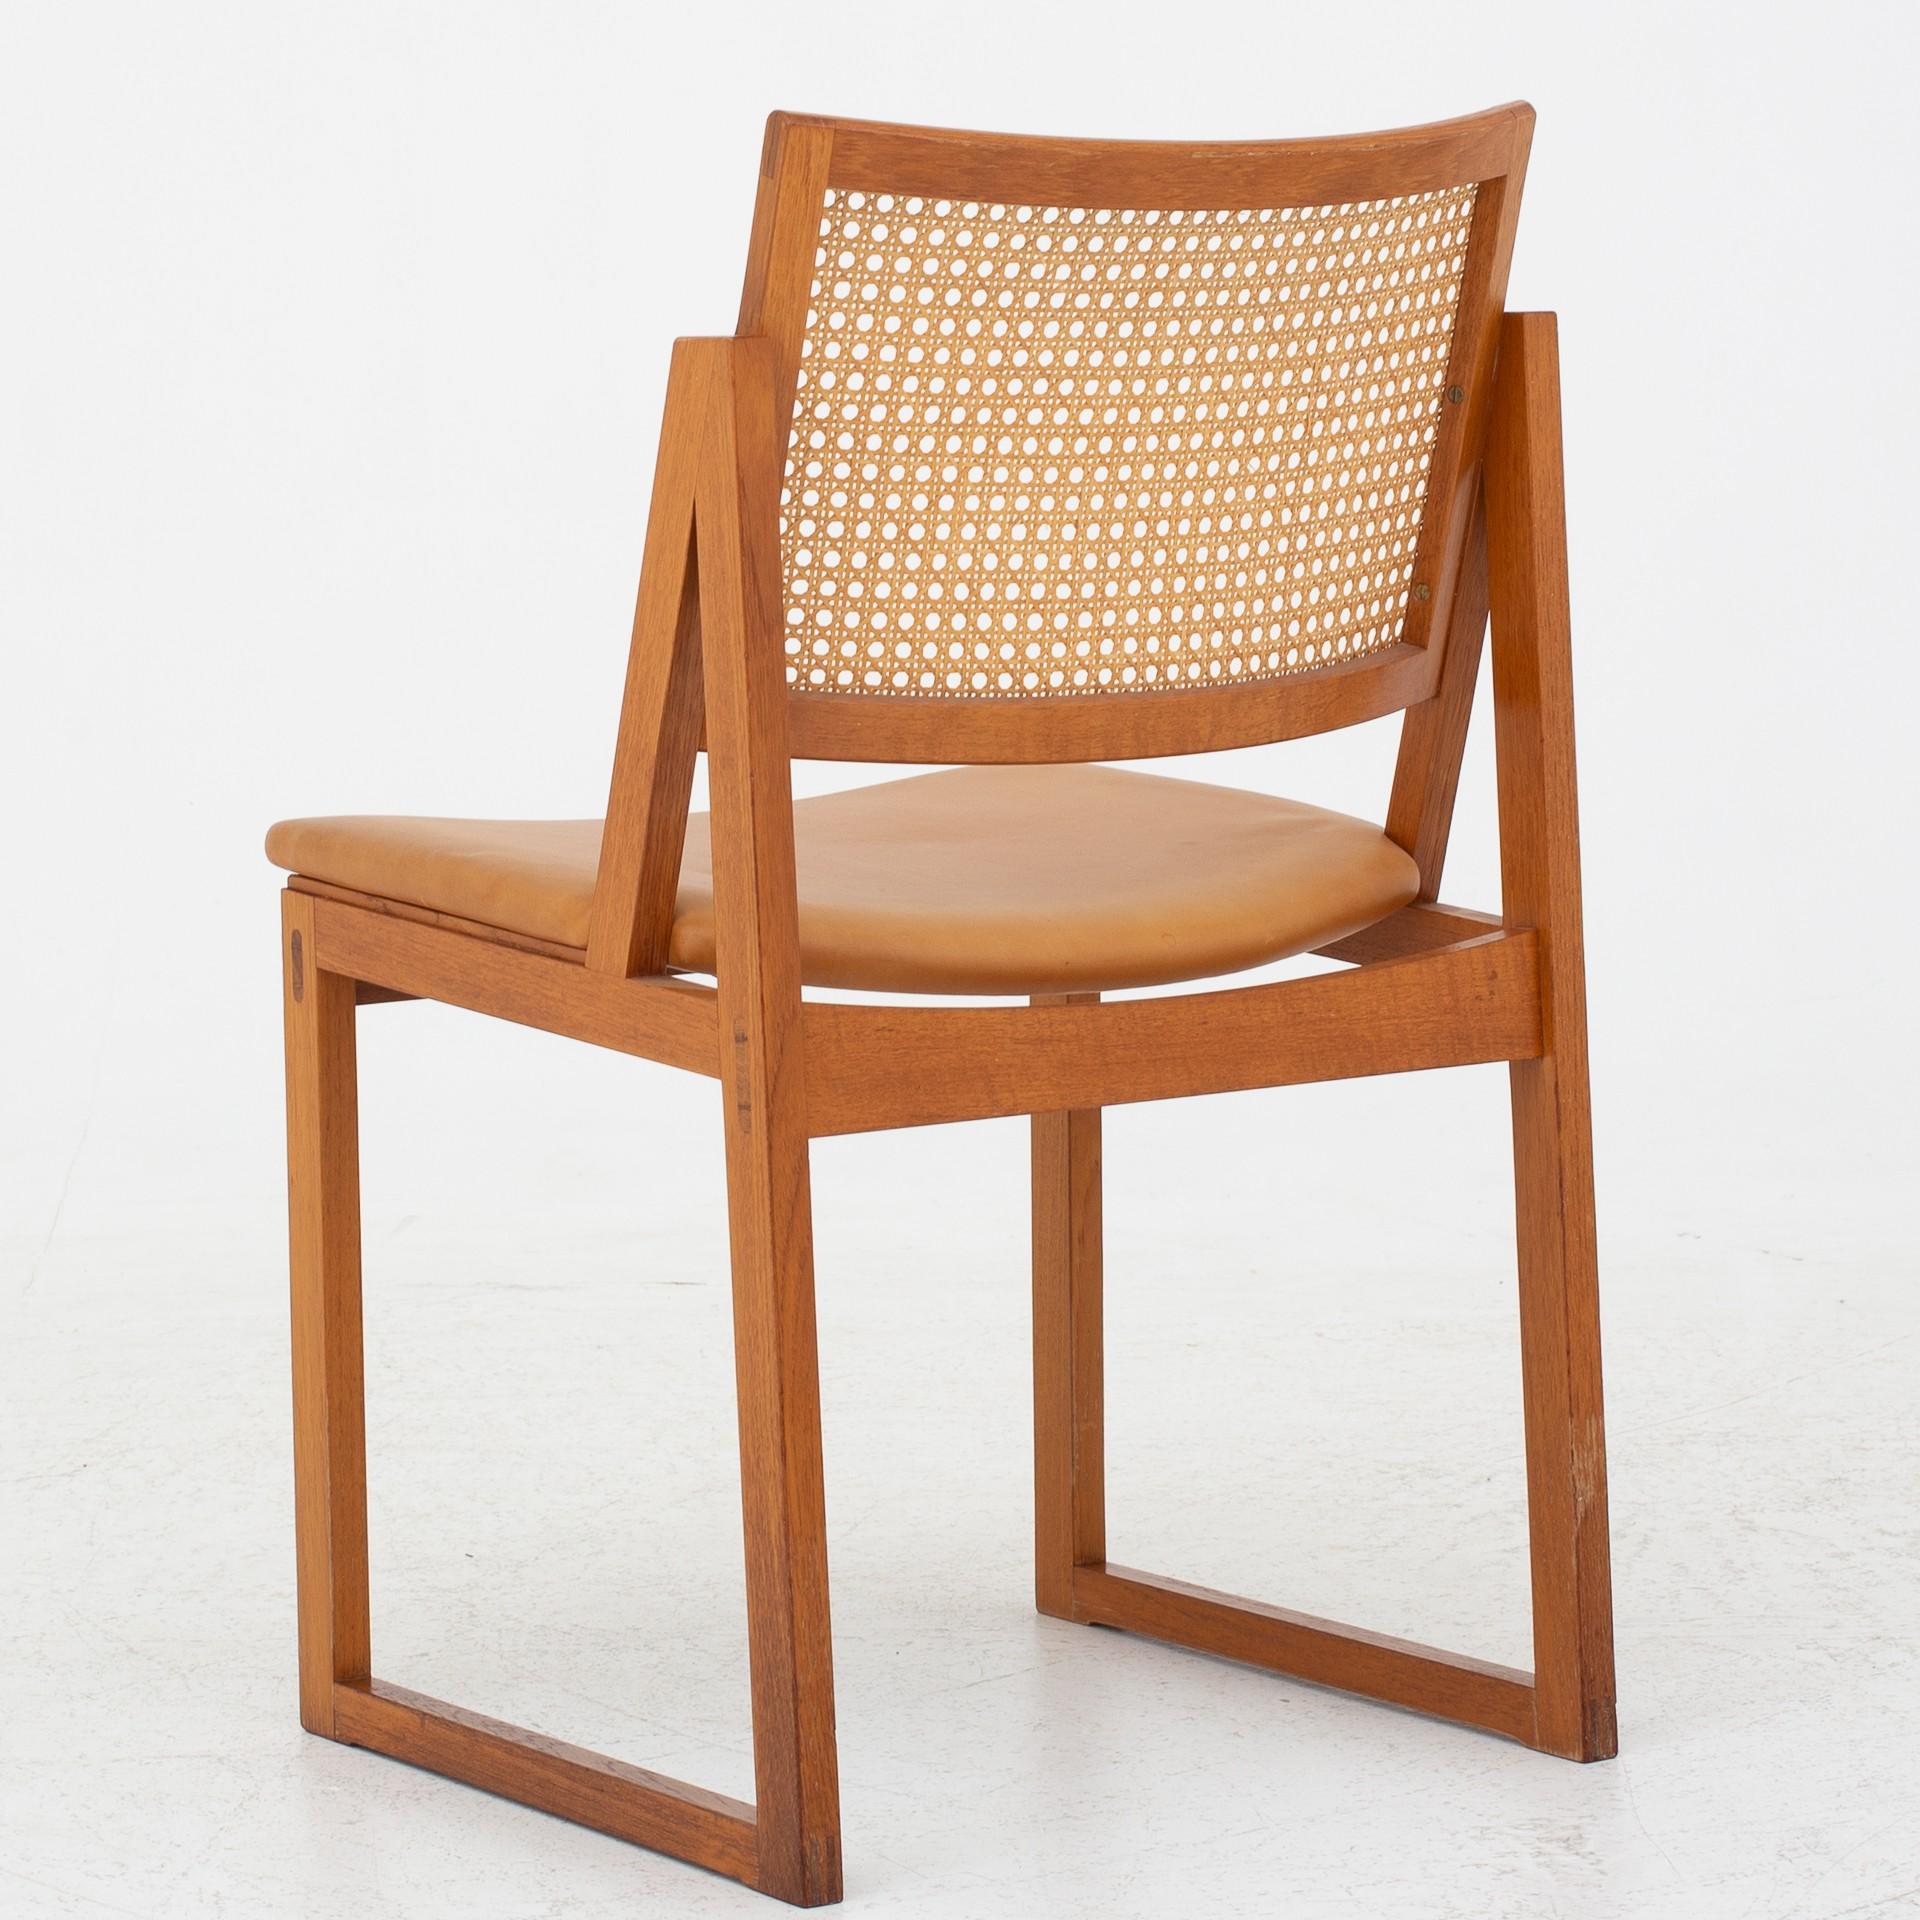 Four dining chairs in mahogany and rattan with leather seat. Maker Søborg Møbelfabrik.